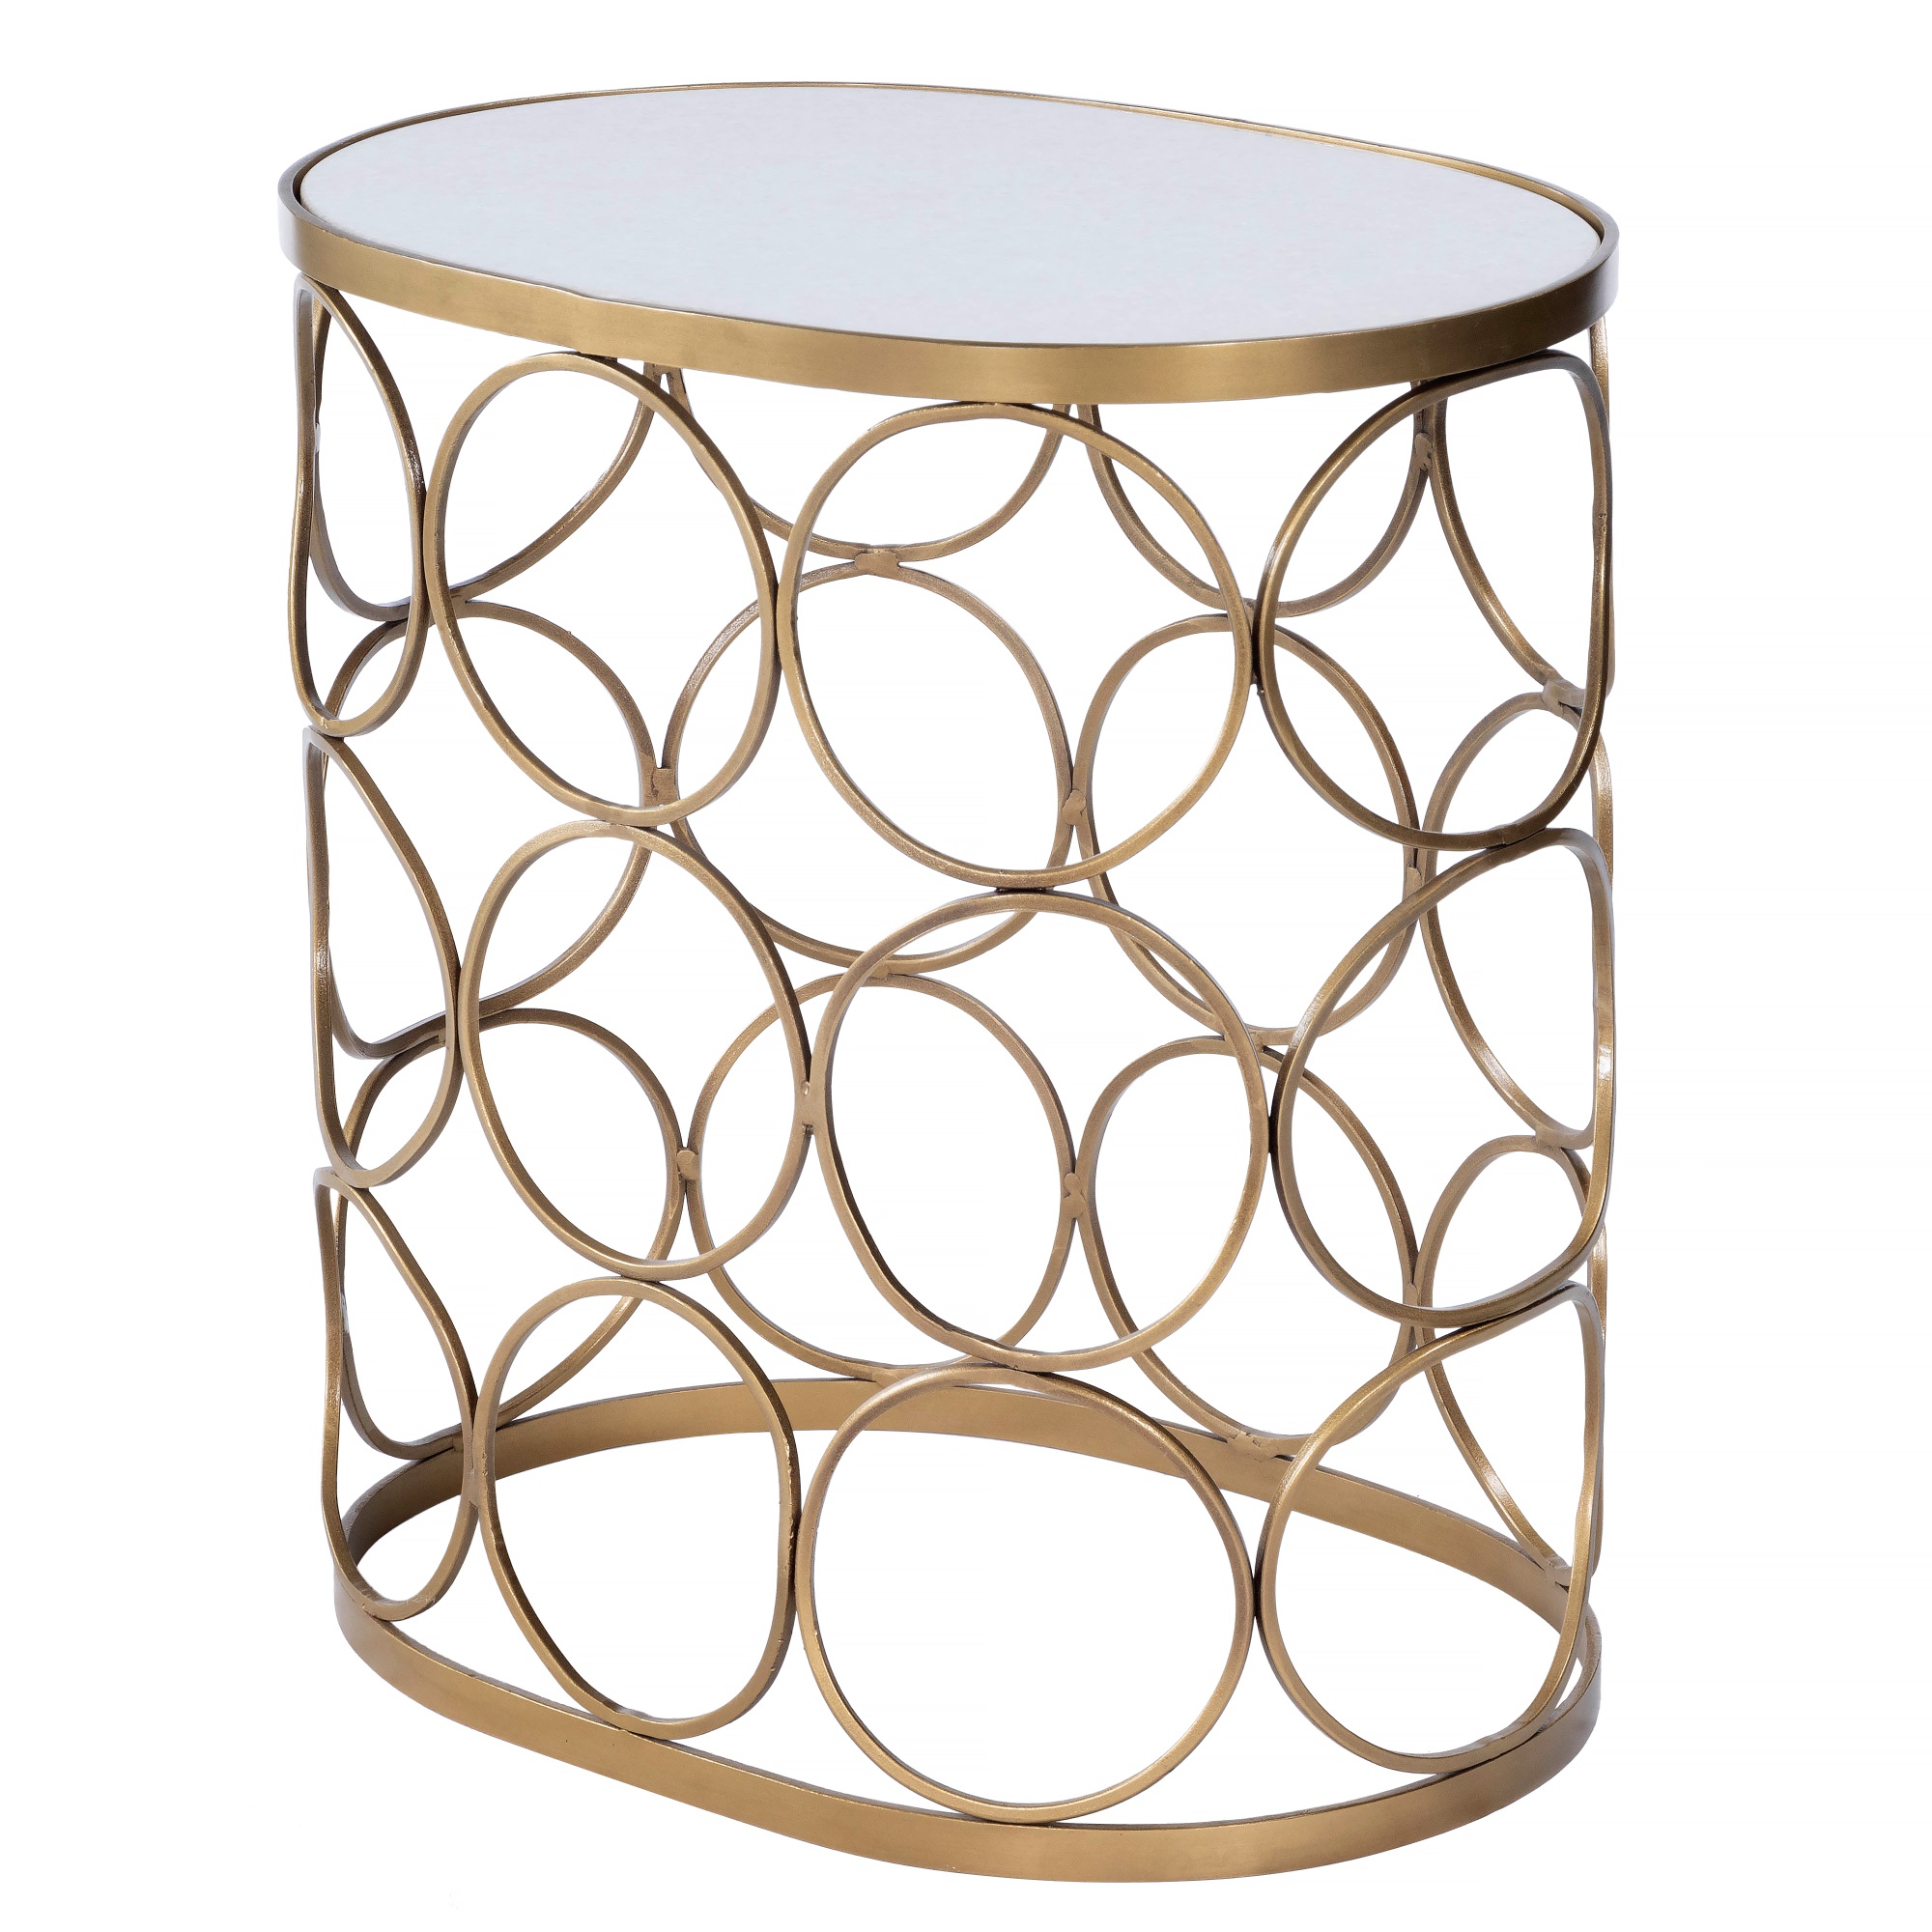 Butler Speciality Company Butler Specialty Company, Talulah Oval Marble Accent Table, Gold